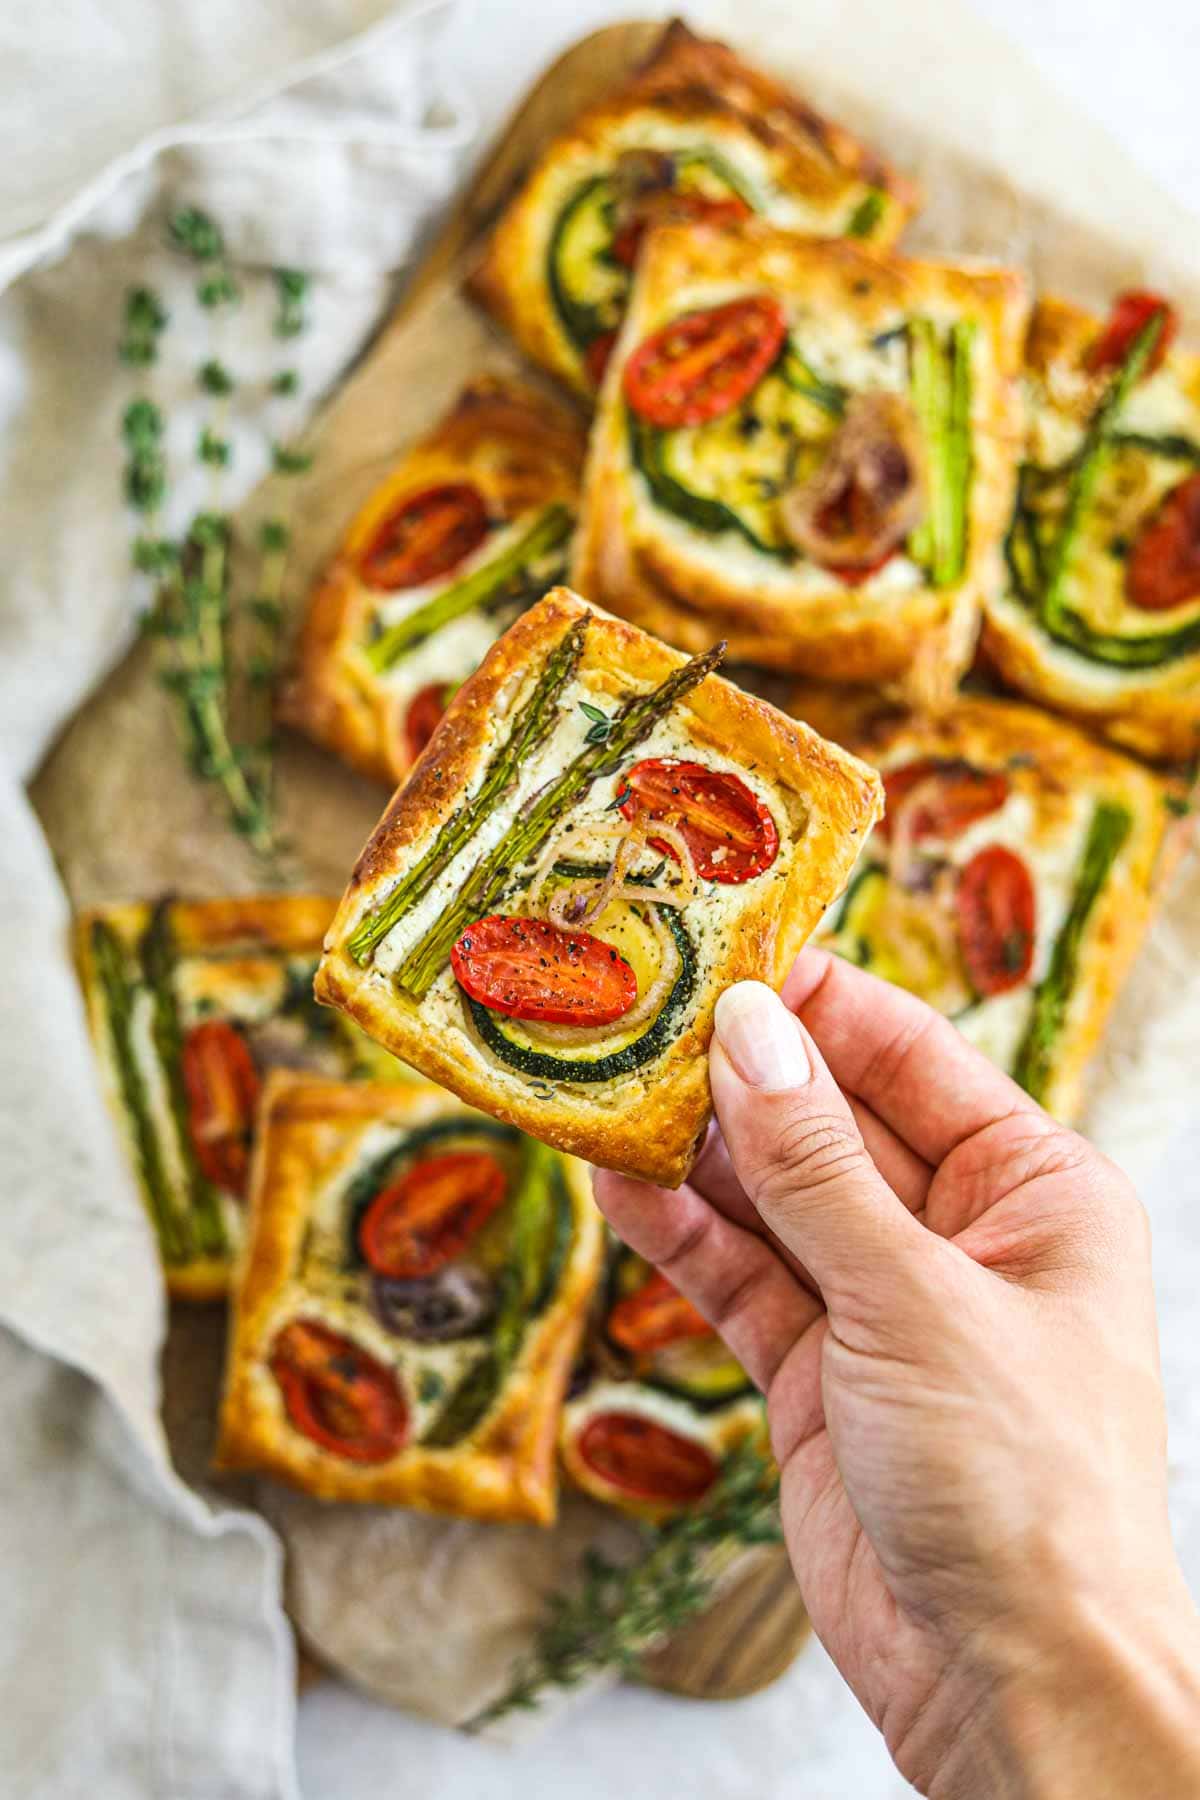 Photo of hand holding a goat cheese puff pastry vegetable tart.